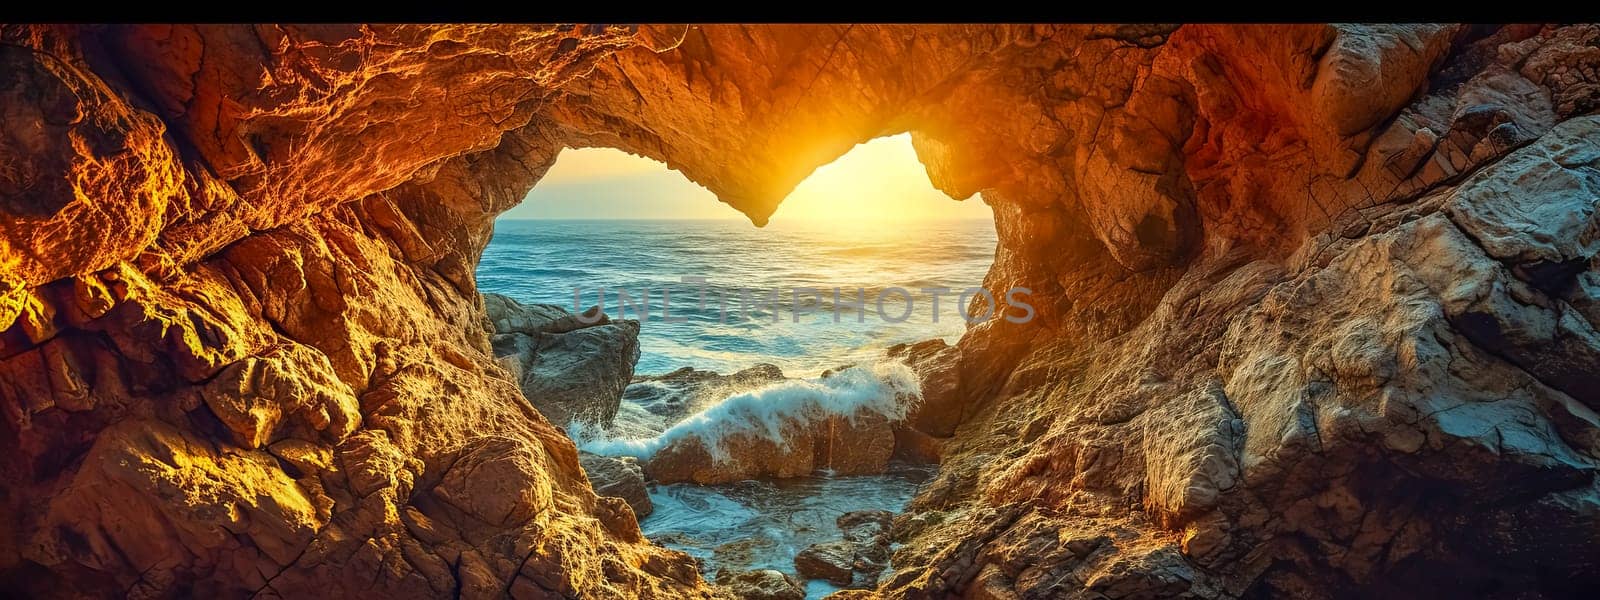 Valentine. A majestic view from within a cave, framing a heart-shaped opening that overlooks the ocean bathed in the golden light of sunset, creating a romantic and serene seascape.